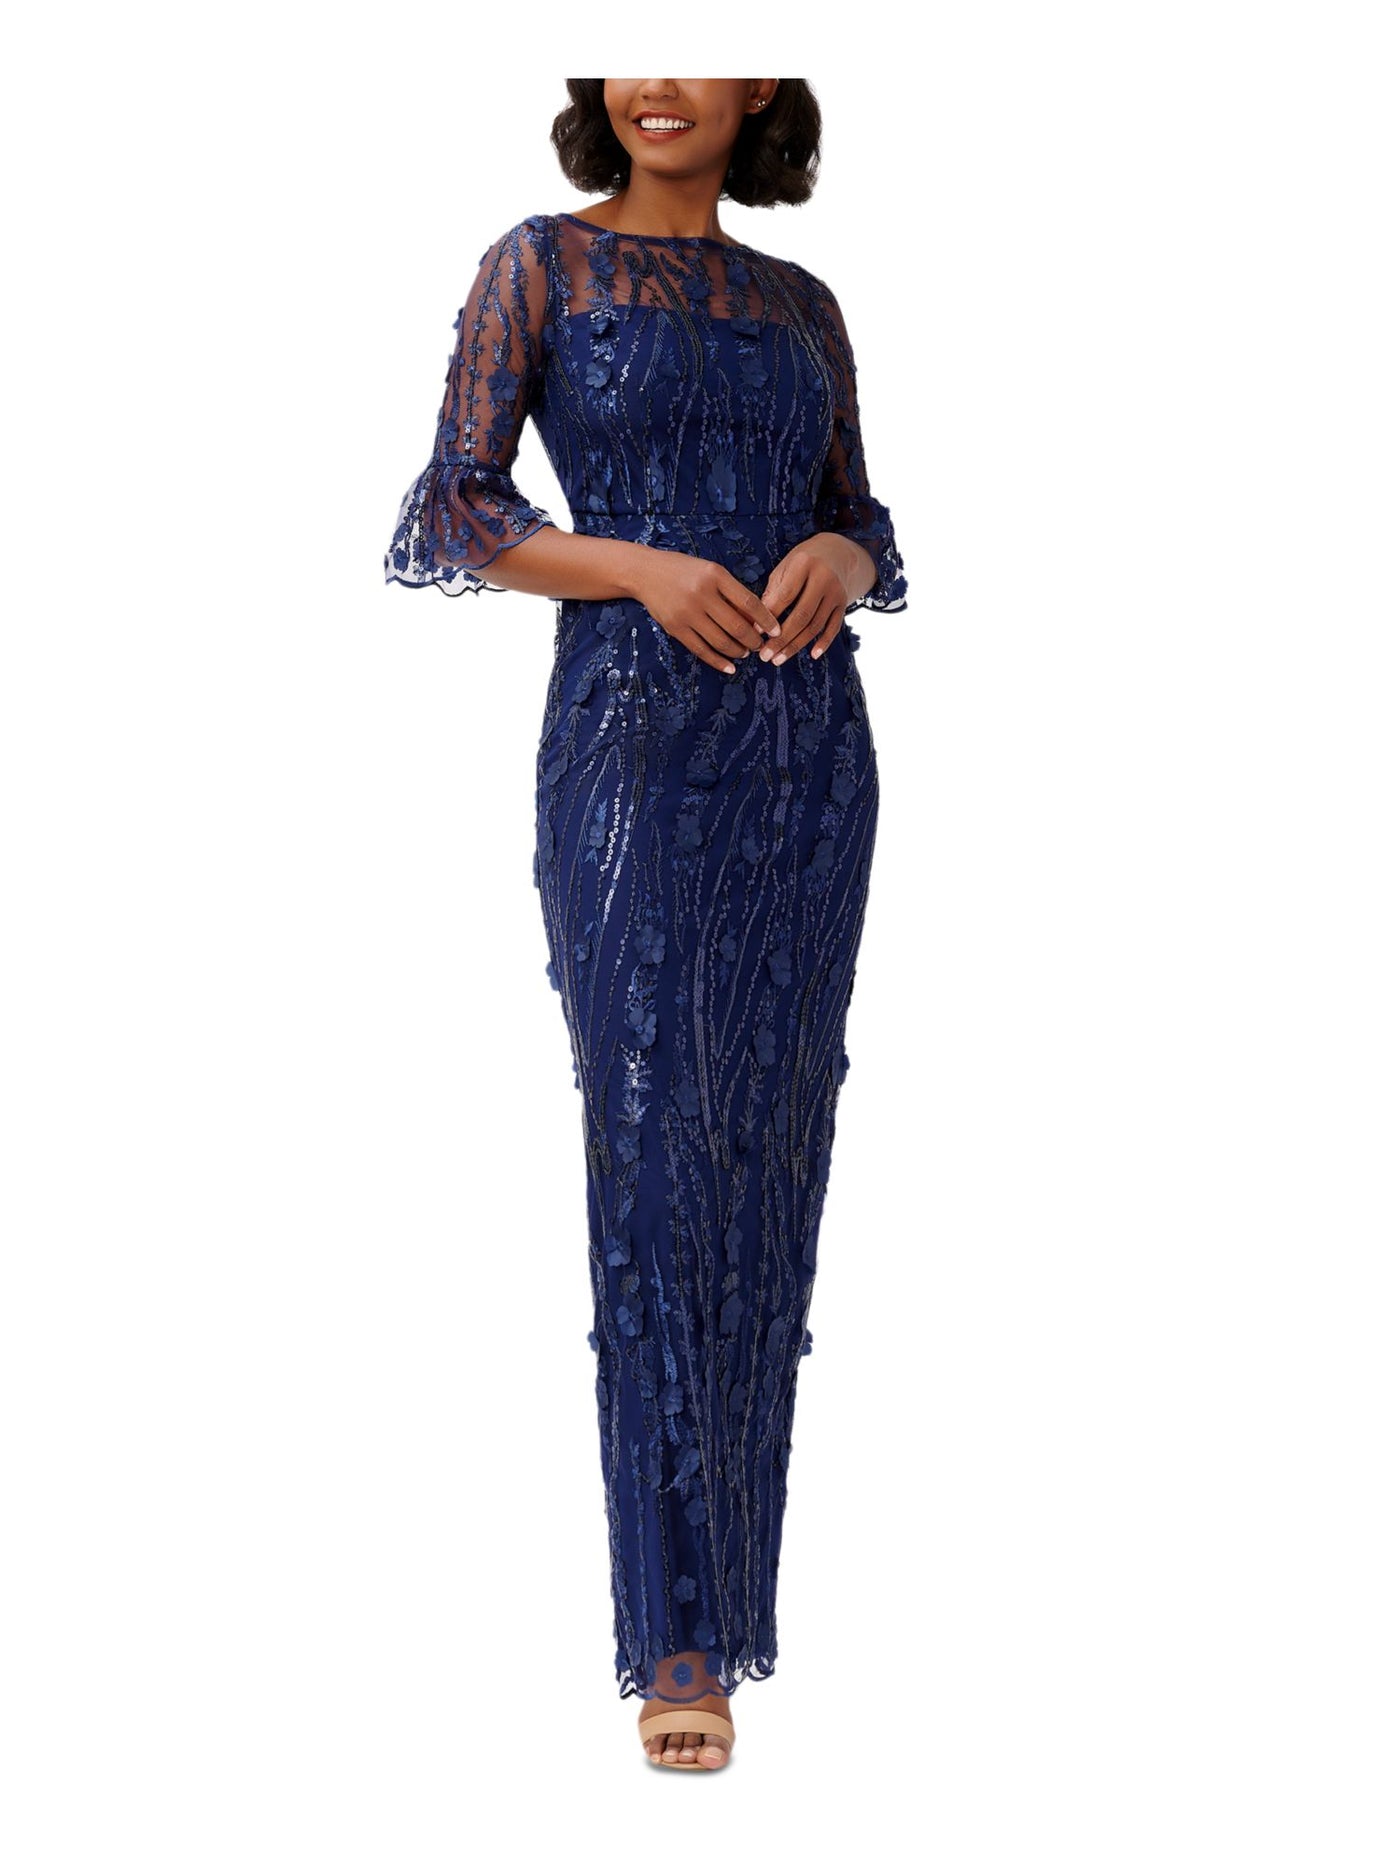 ADRIANNA PAPELL Womens Navy Embellished Sequined Line 3-d Floral Bell Sleeves 3/4 Sleeve Boat Neck Maxi Cocktail Sheath Dress 2